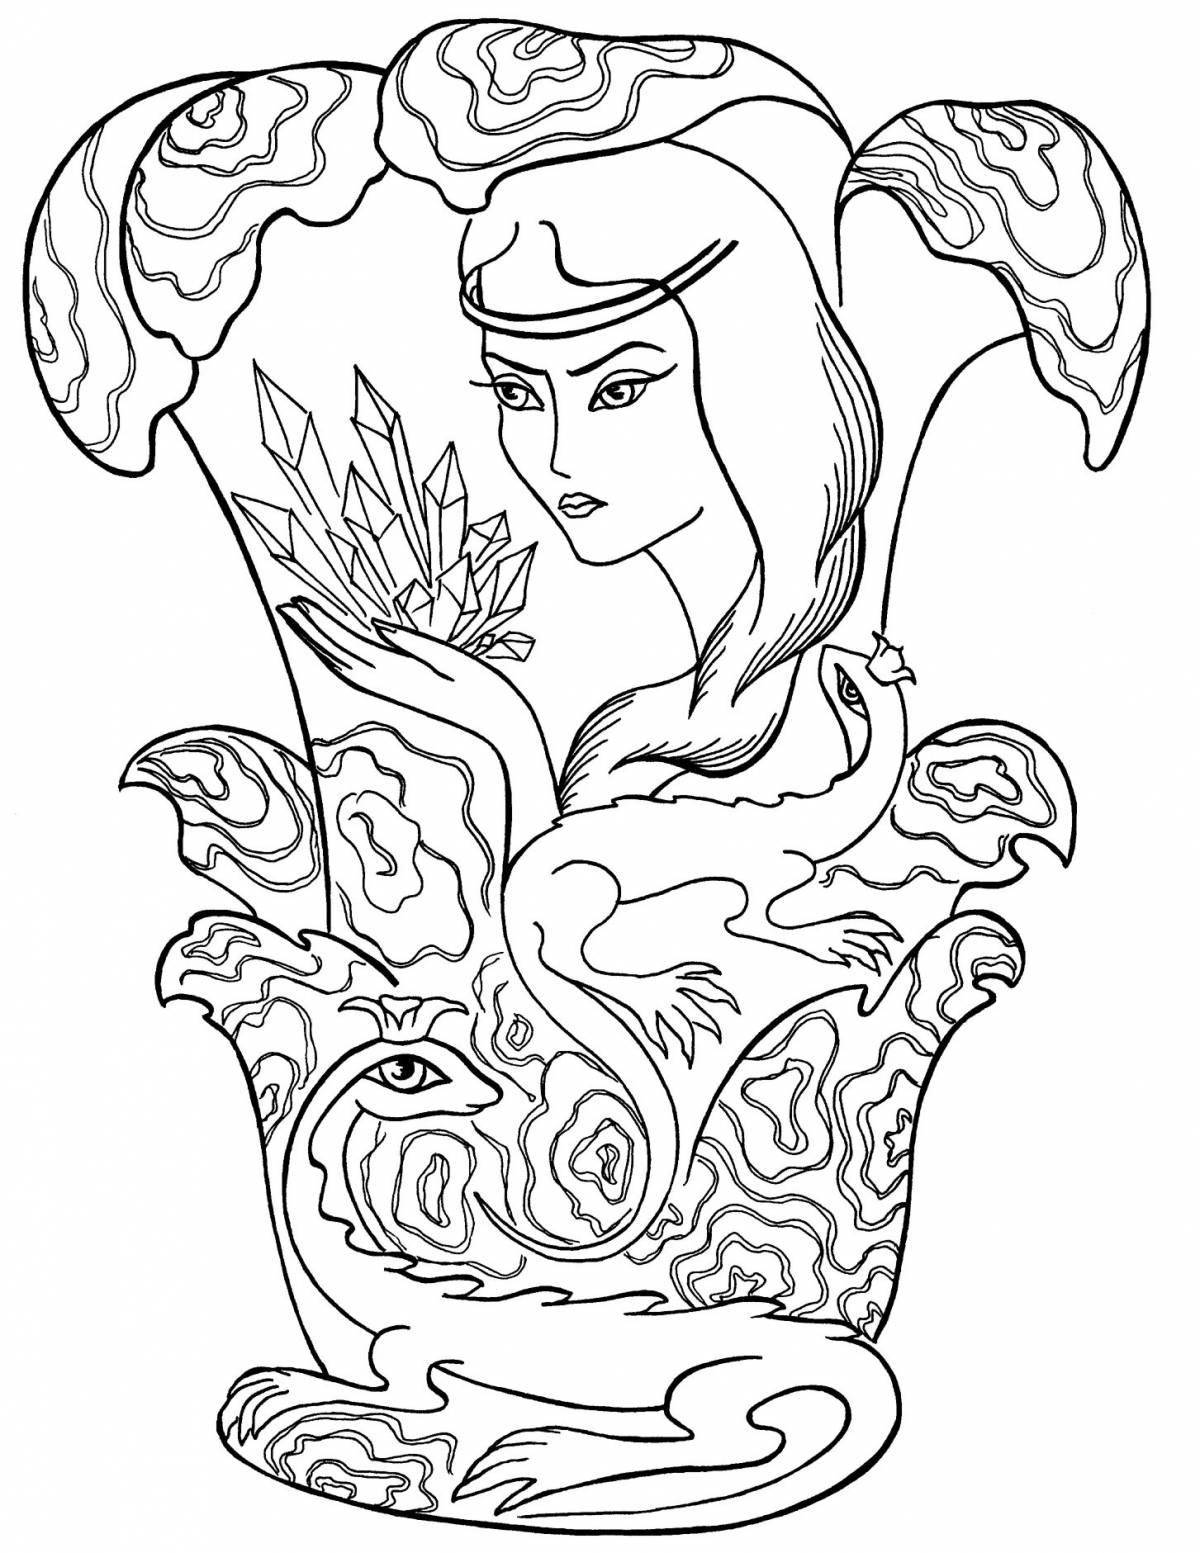 Striking stone flower coloring page for kids